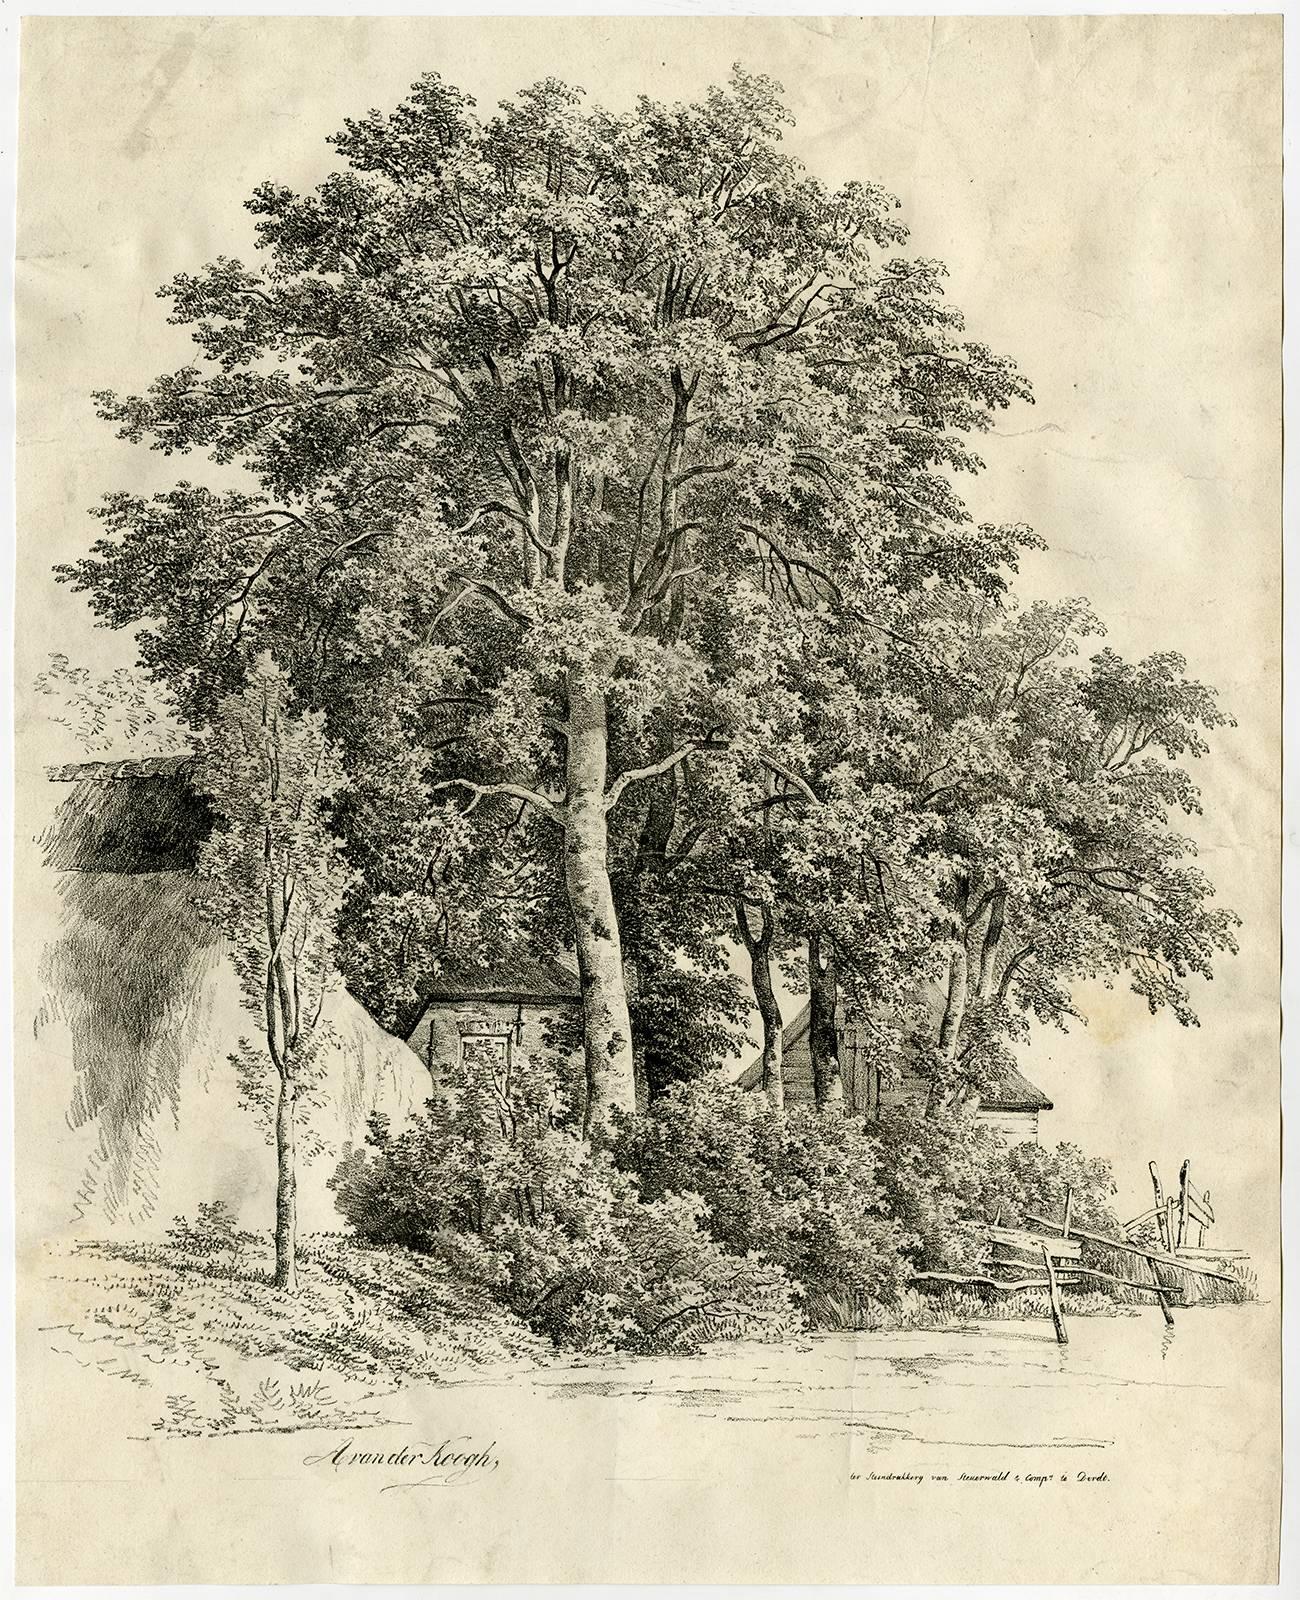 Adrianus van der Koogh Landscape Print - Untitled - Large view of a farmhouse and barn behind a copse of trees.